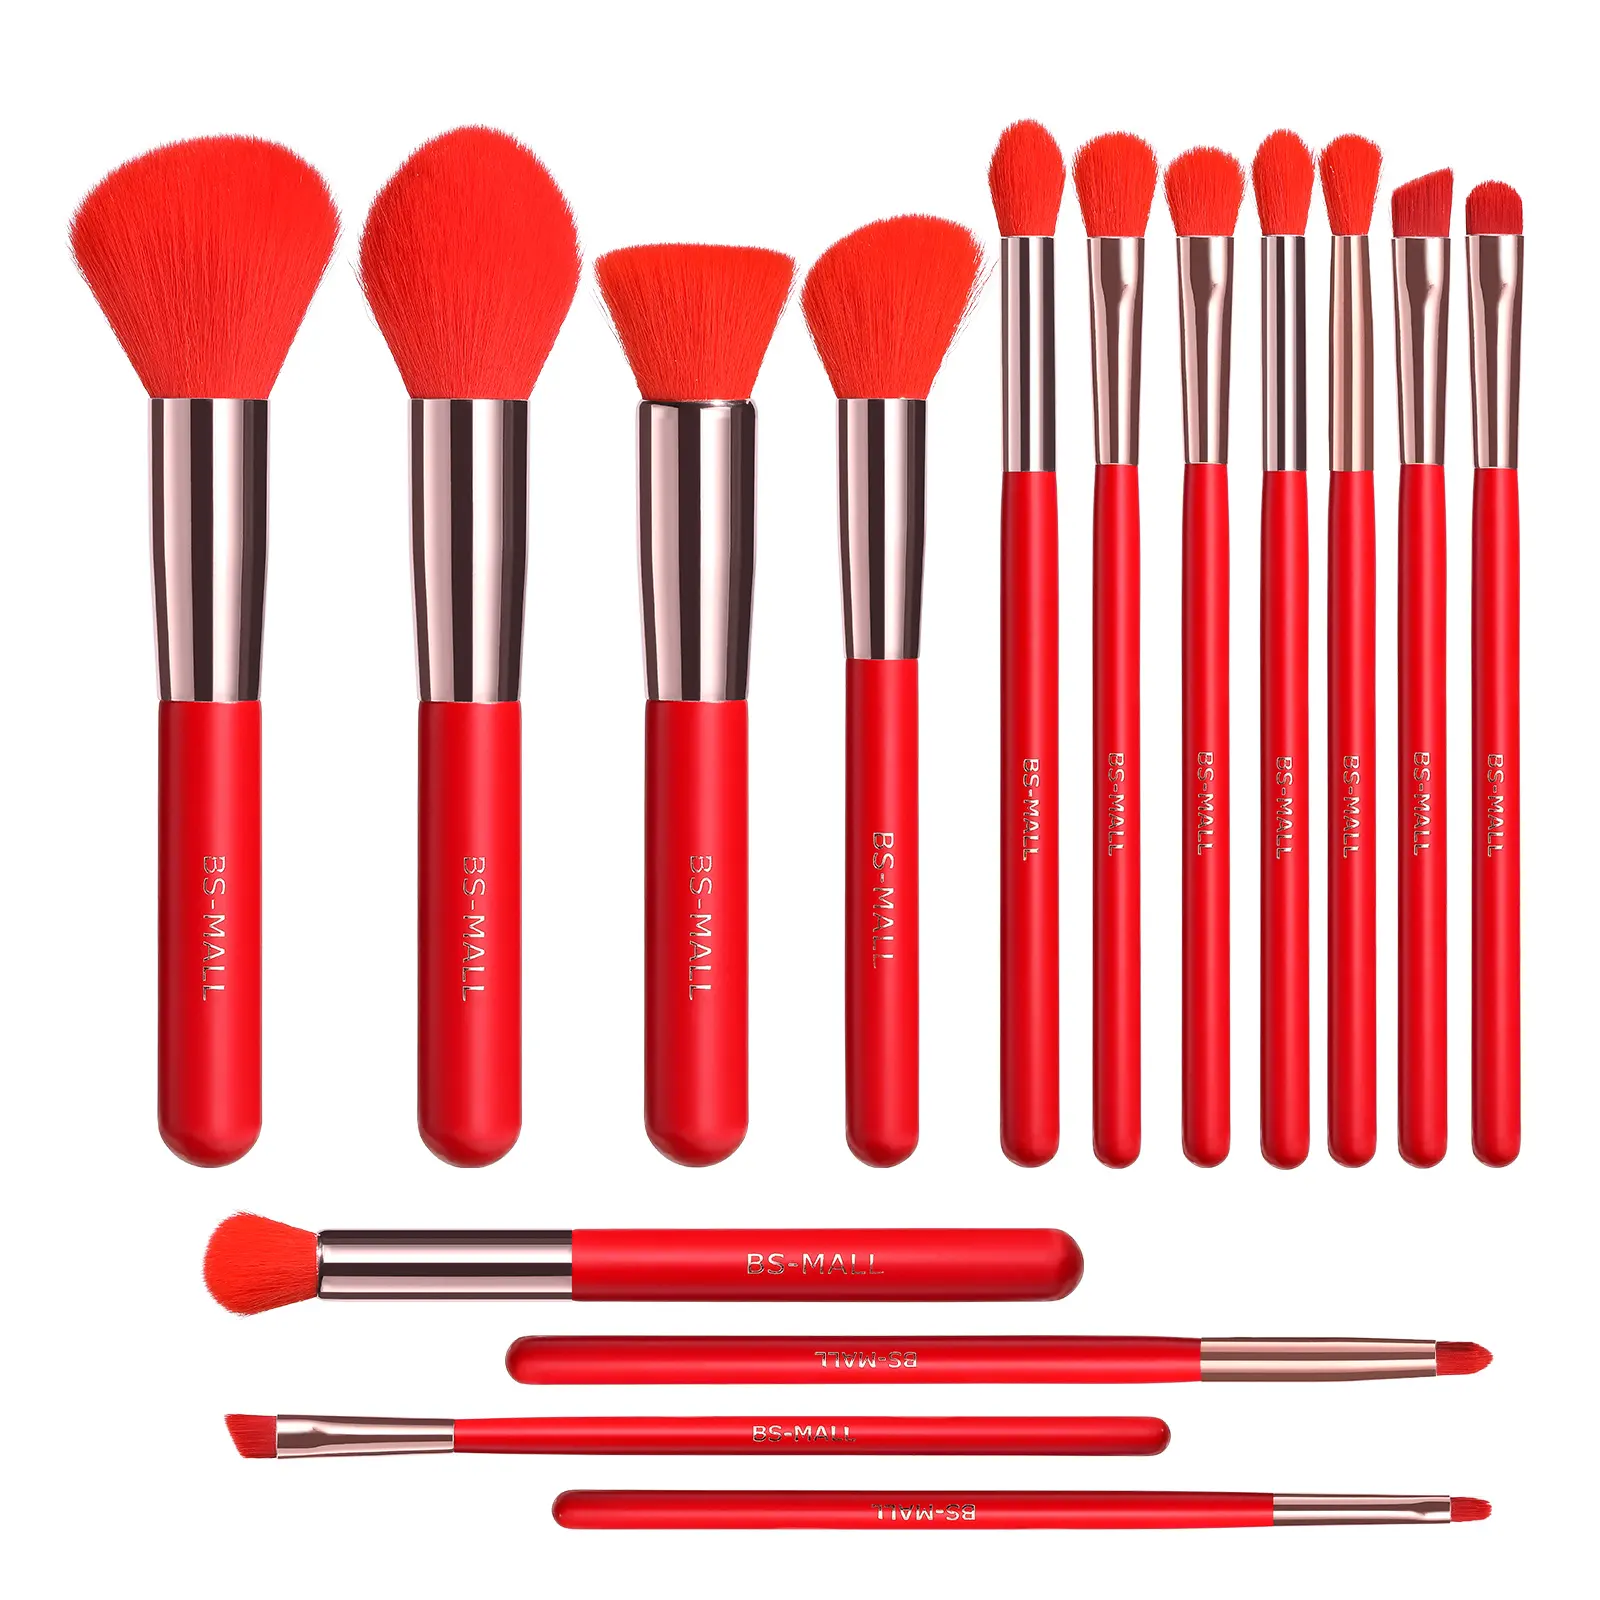 BS-MALL Red Makeup Brushes 15PCS High Quality Vegan Synthetic Red Hair Face Makeup Brushes Private Label